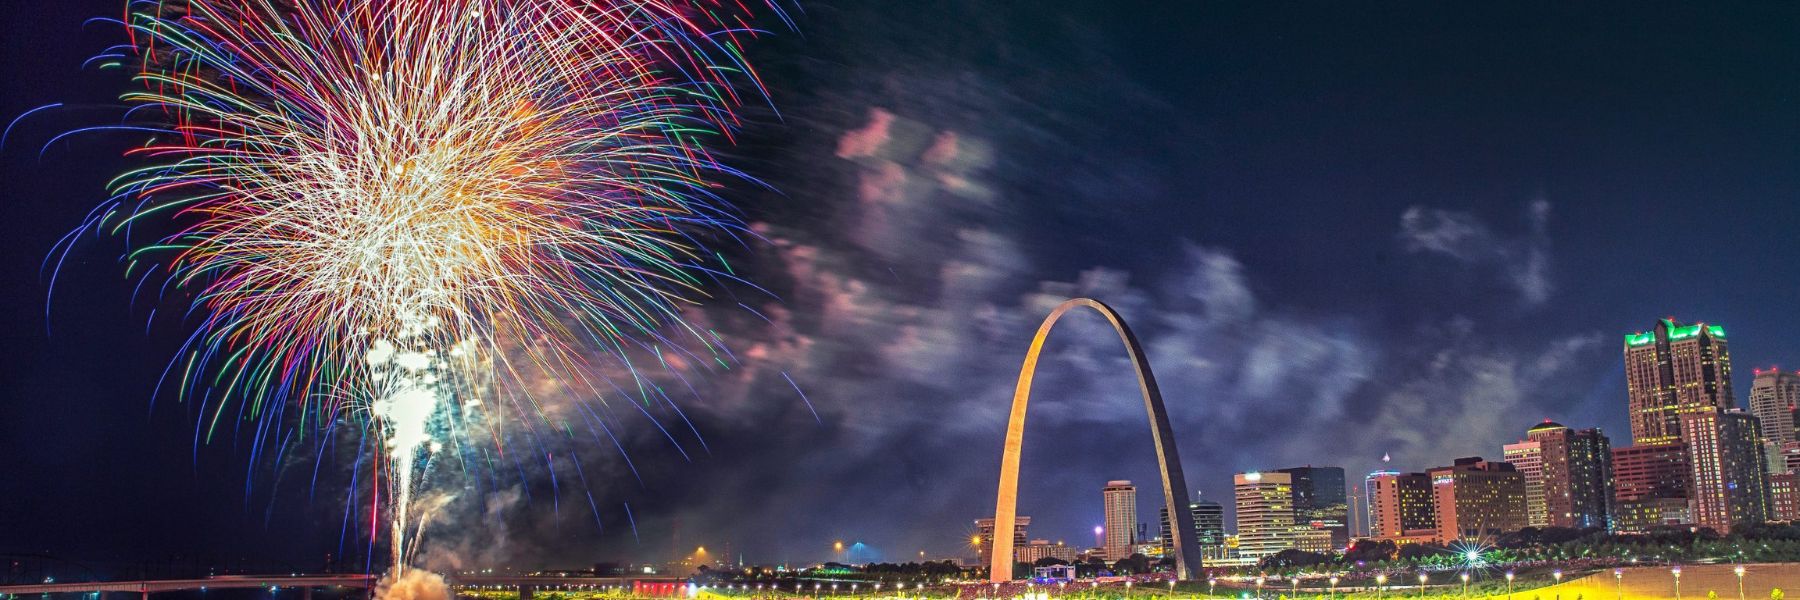 Fireworks light up the sky behind the Gateway Arch on the Fourth of July.